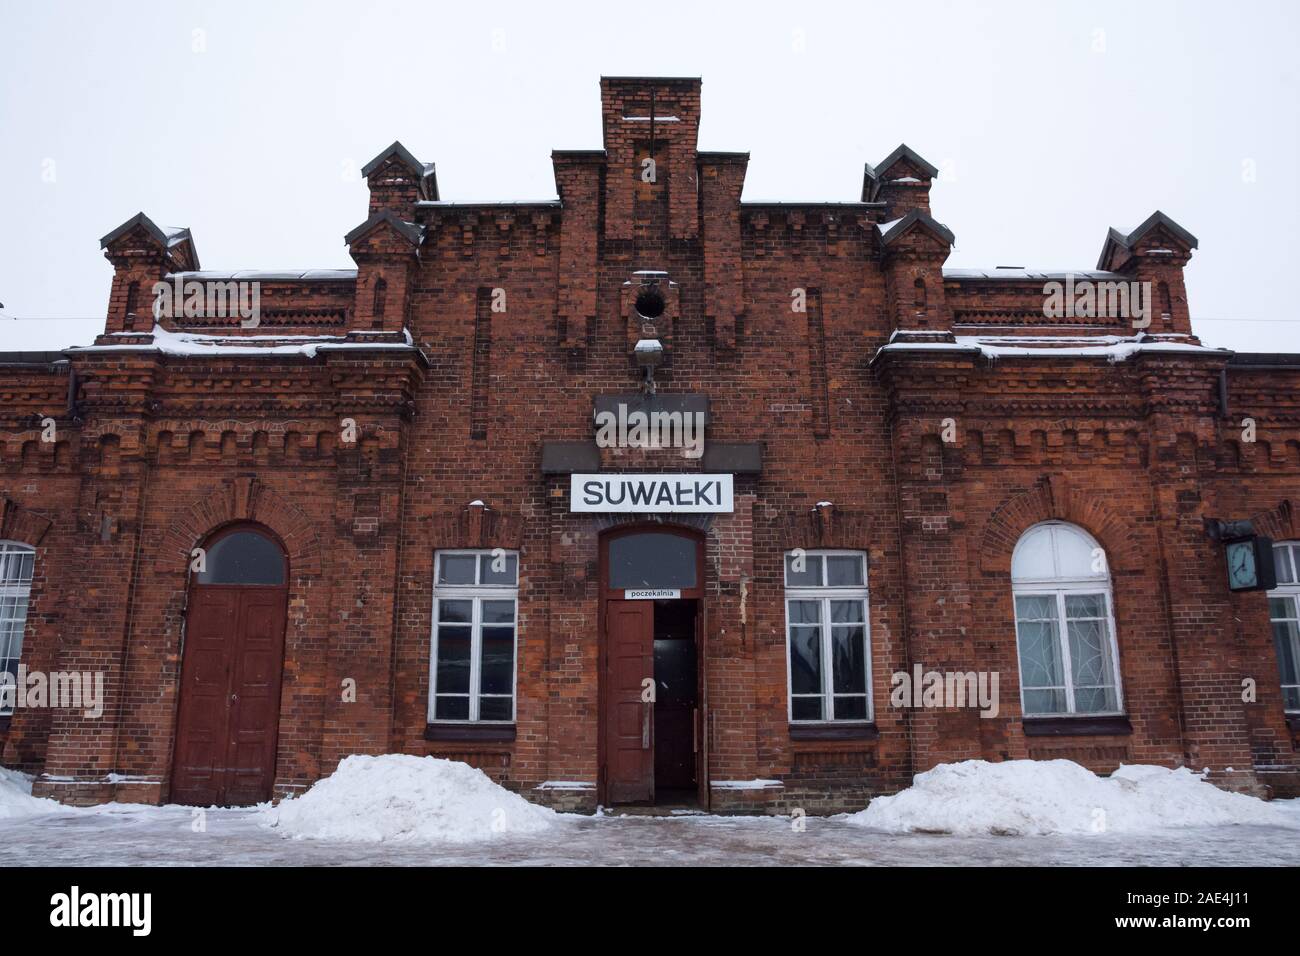 Historic railway station, one of the oldest unchanged monuments from the time of construction in Suwałki (Poland), built in 1870 Stock Photo